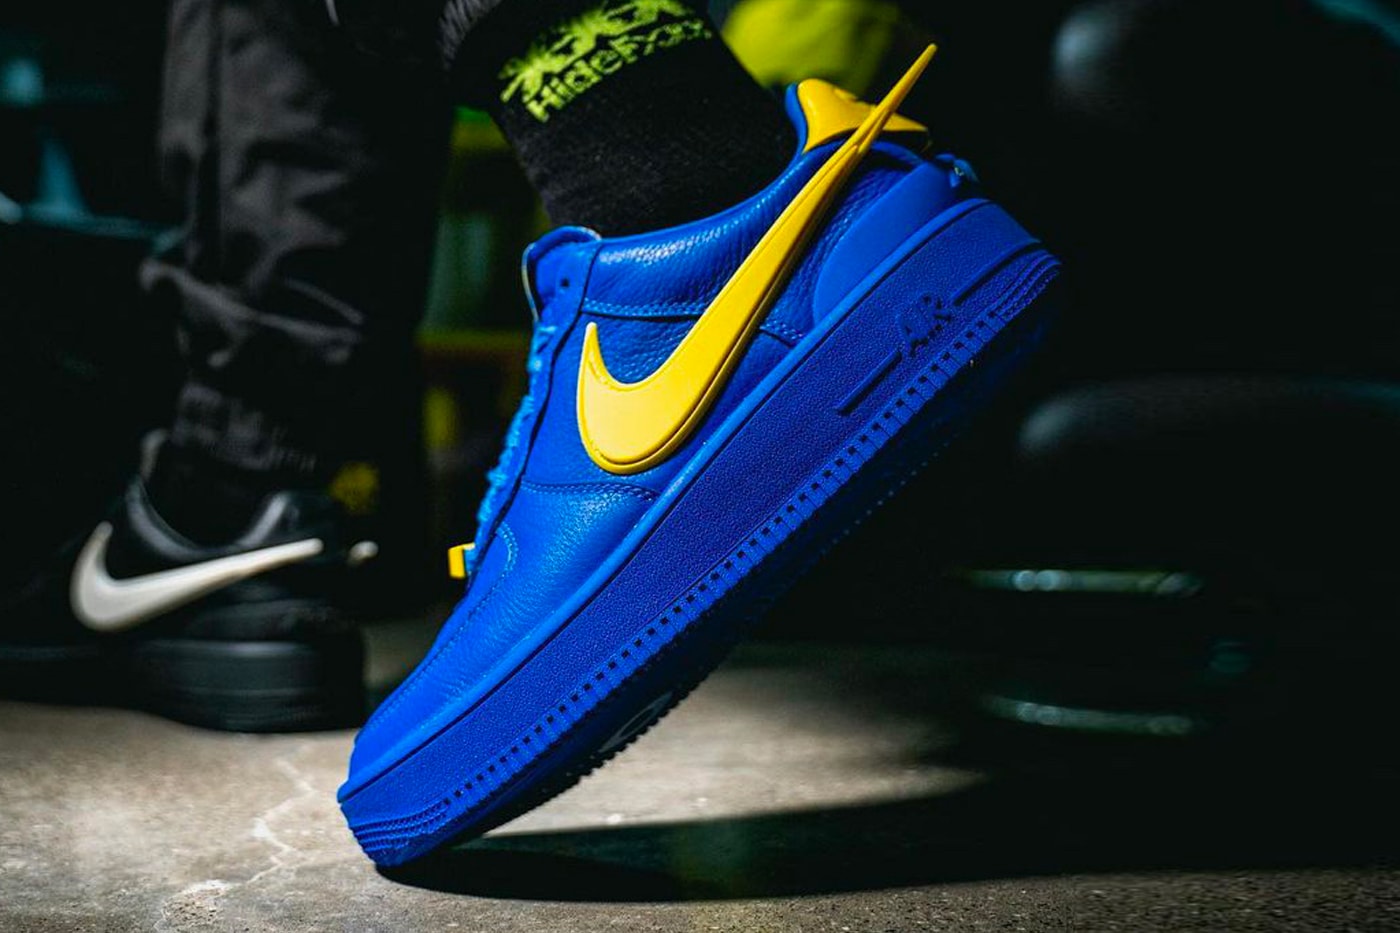 Nike Air Force 1 '07 Review& On foot 